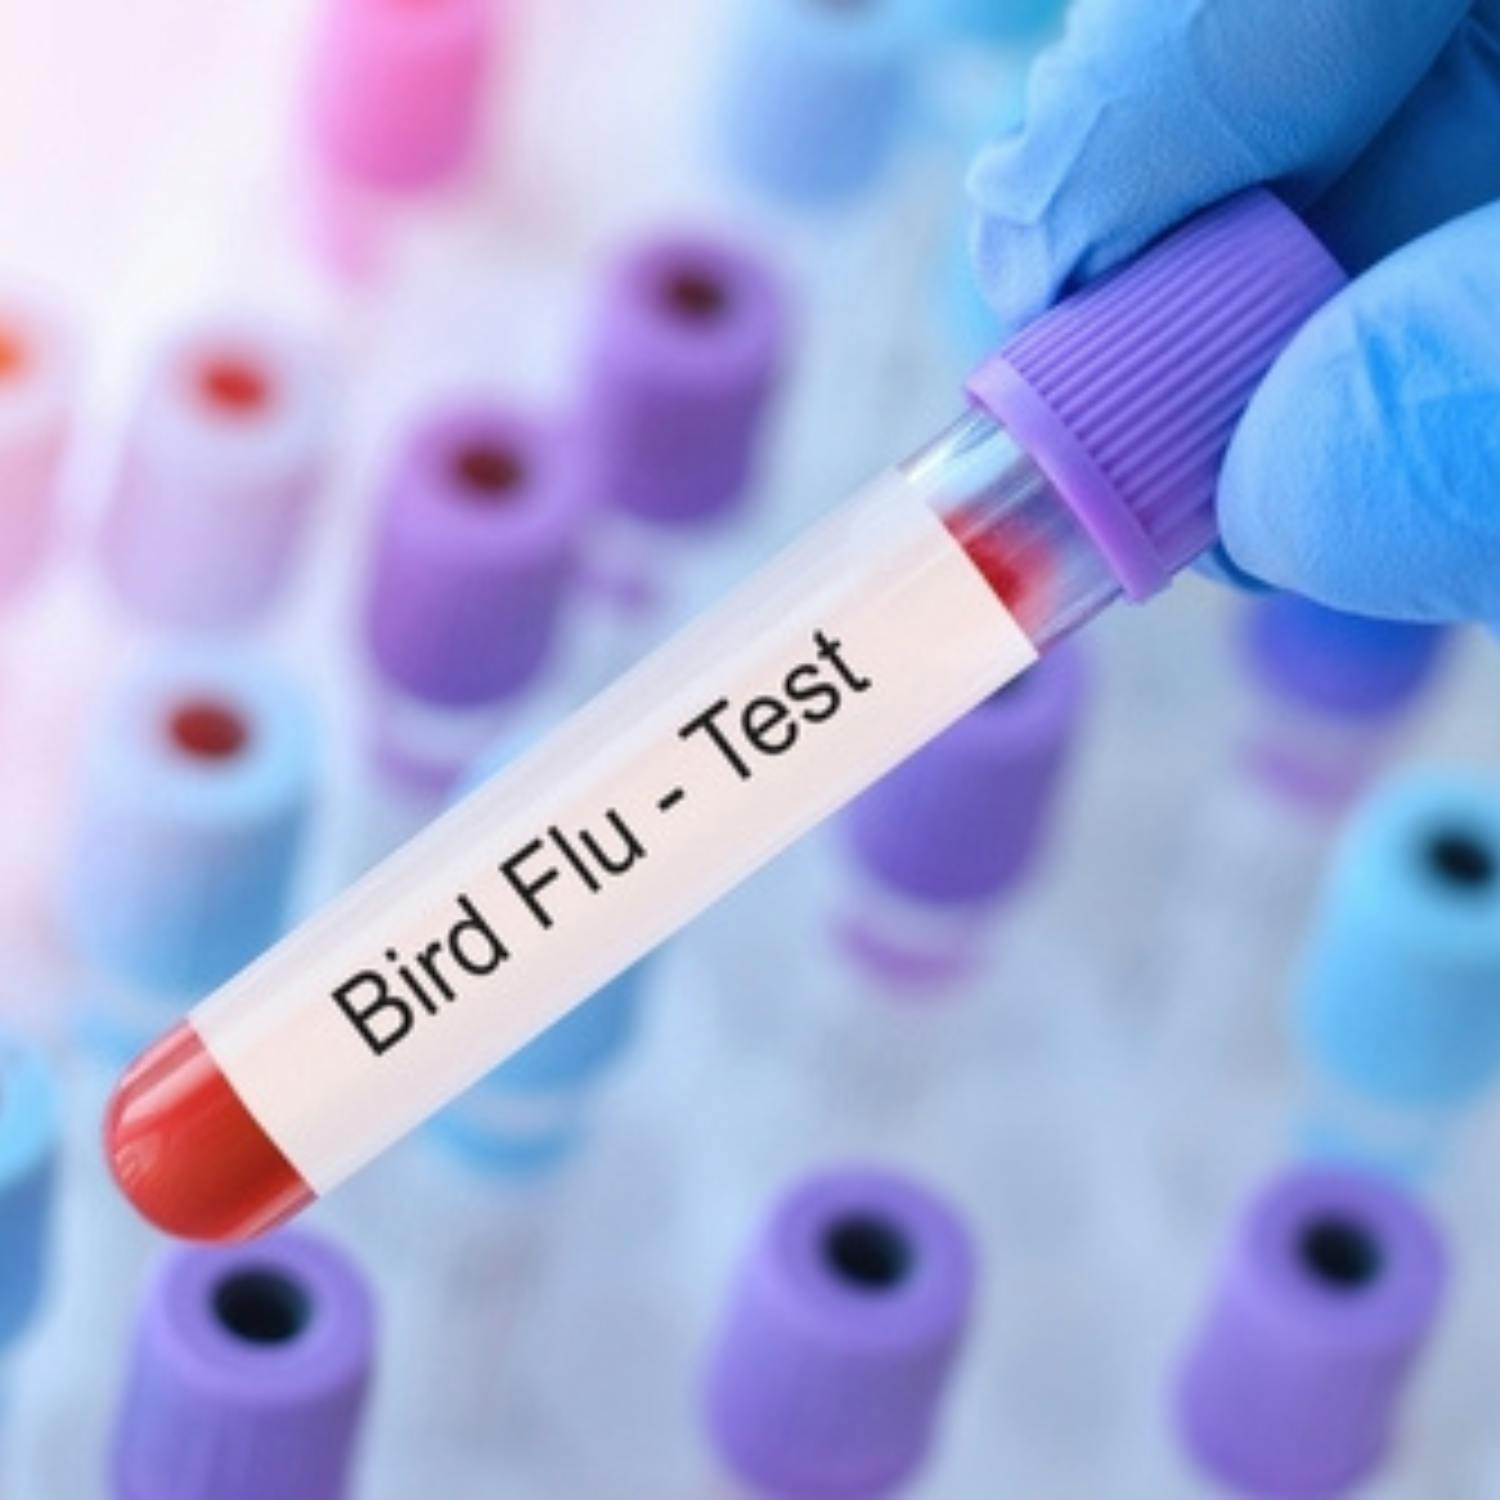 Concerns about the spread of bird flu to humans